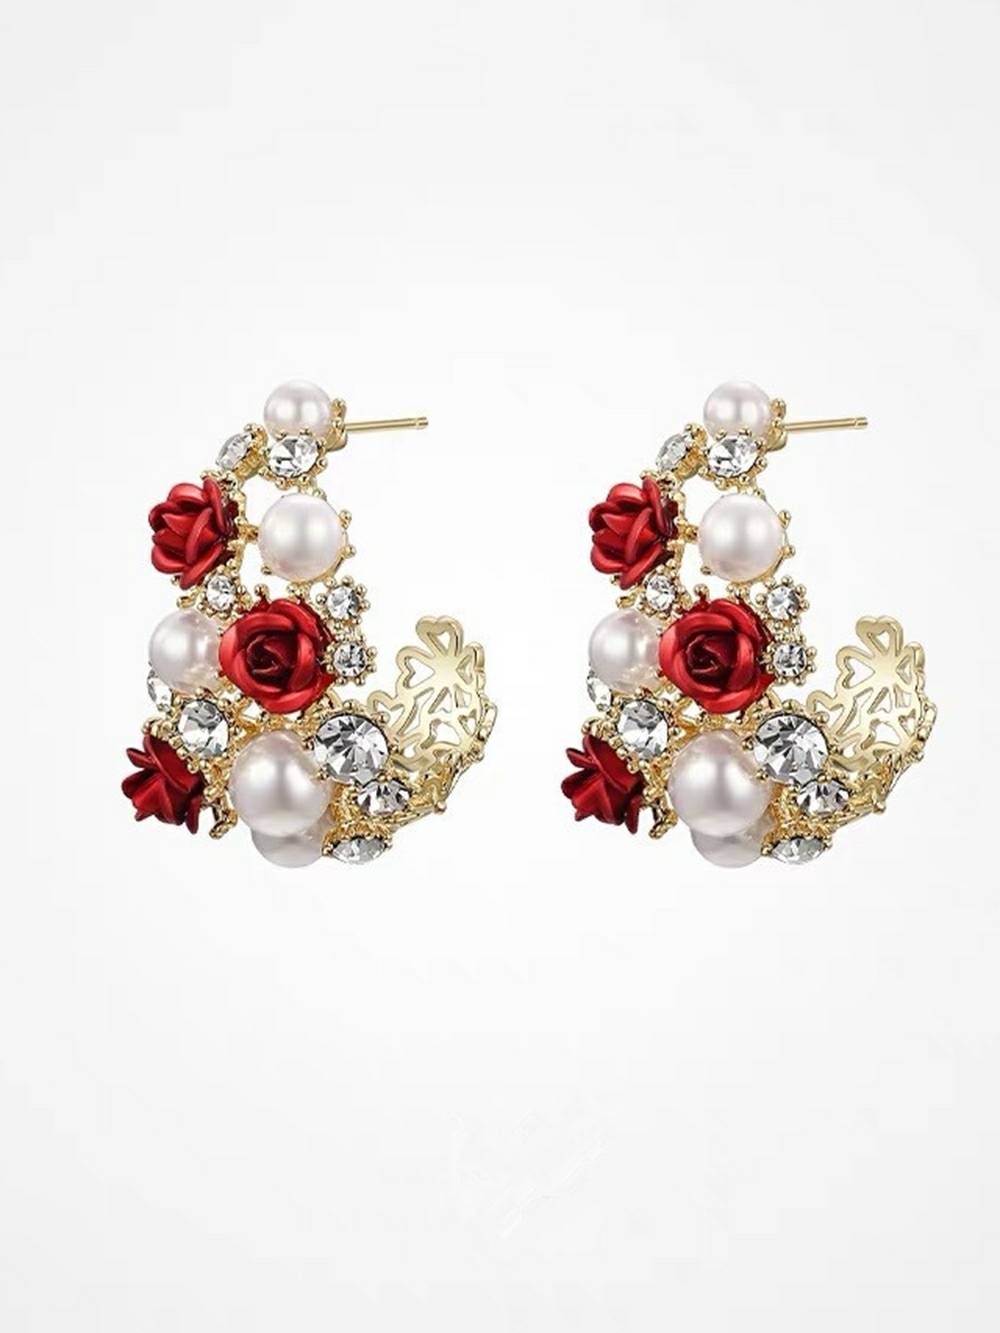 C-Shaped Rose and Pearl Earrings